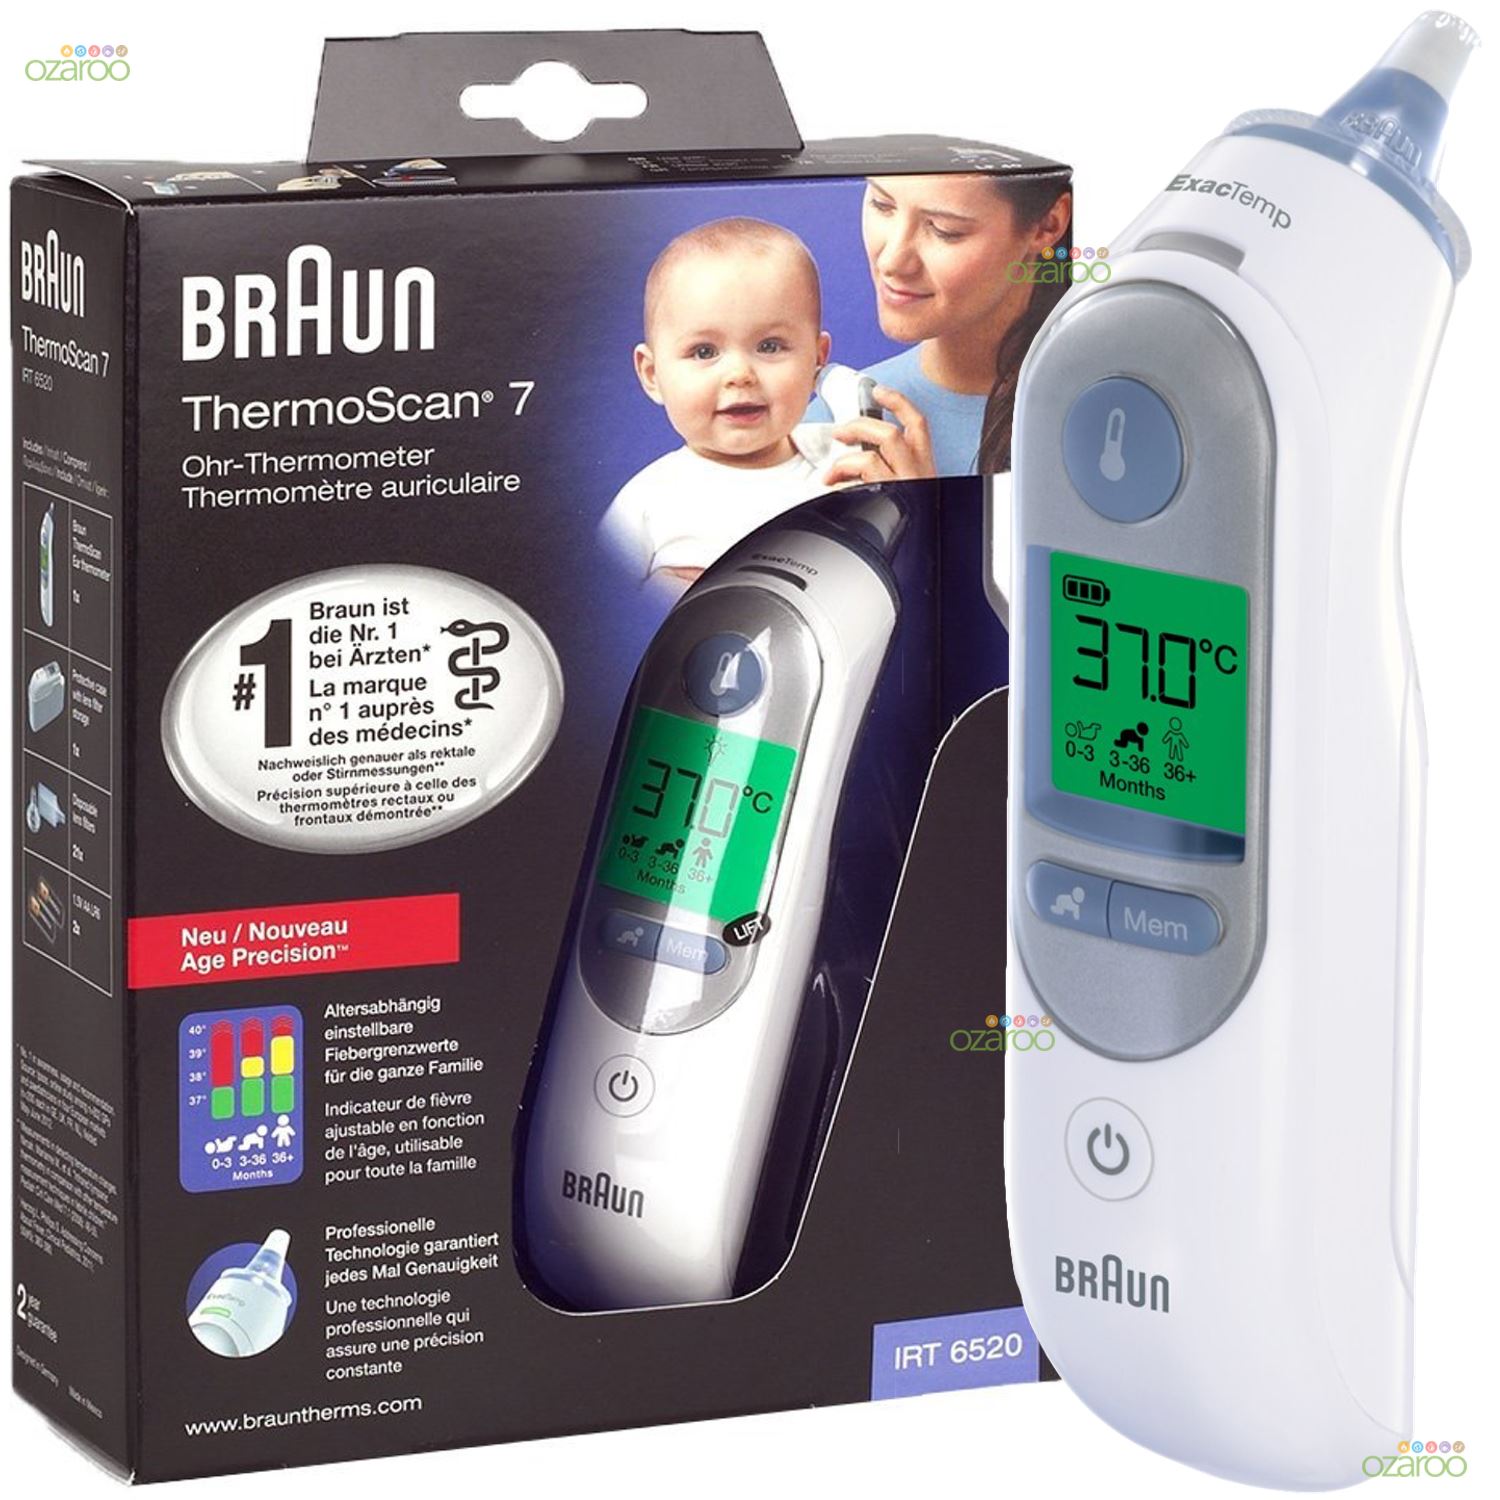 Braun ThermoScan® 6 Thermomètre auriculaire - How to use 